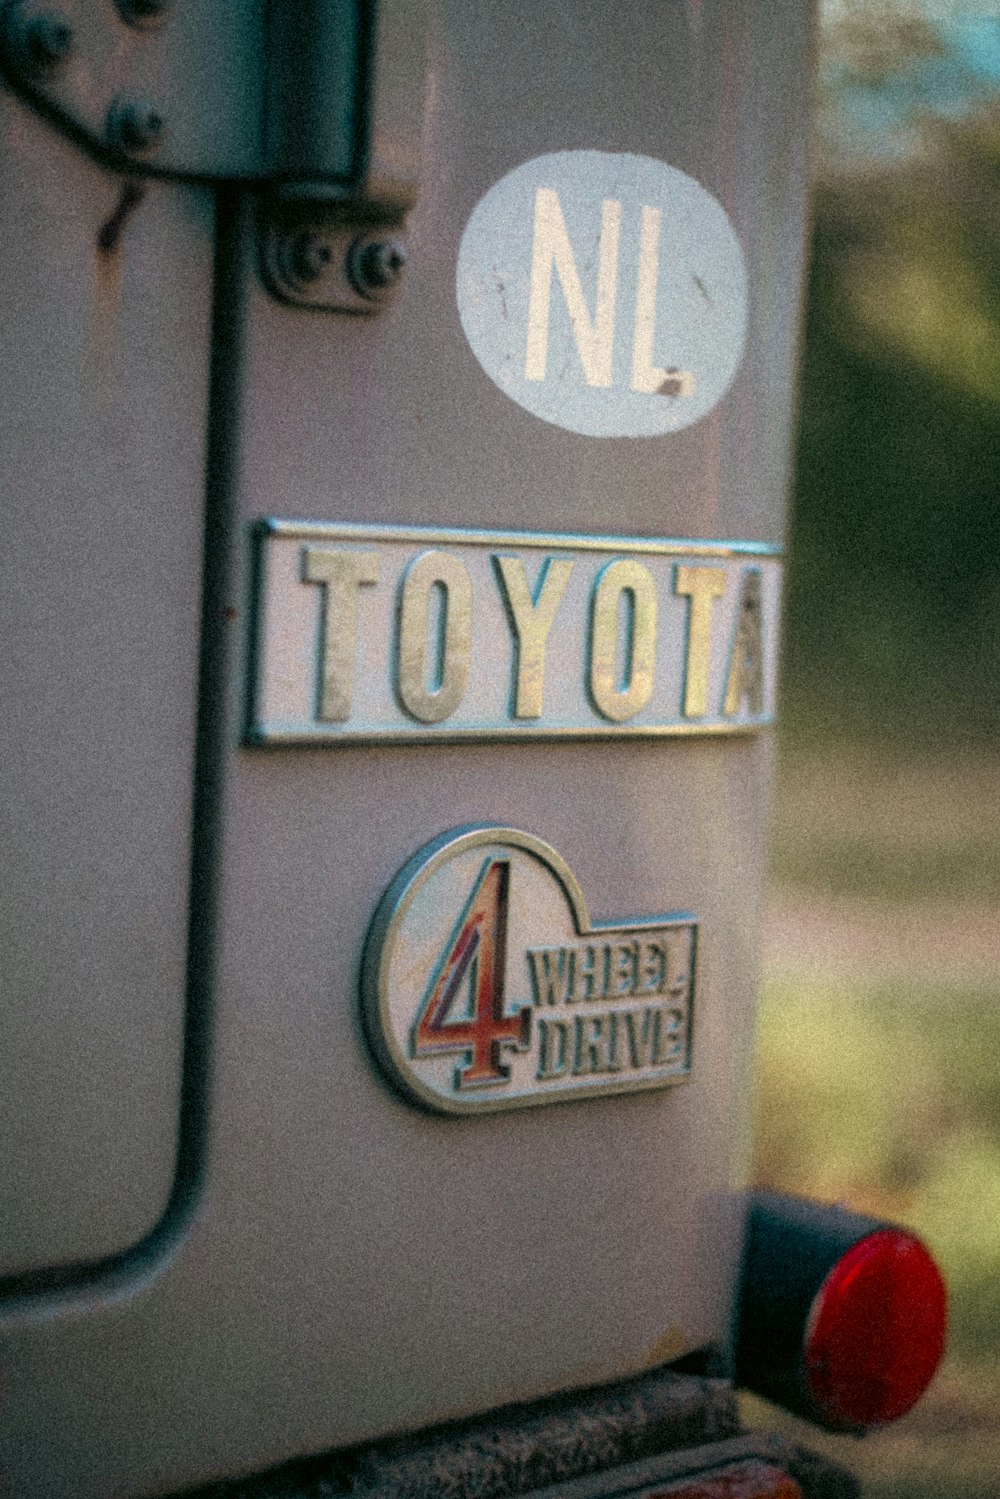 a close up of the emblem on a vehicle